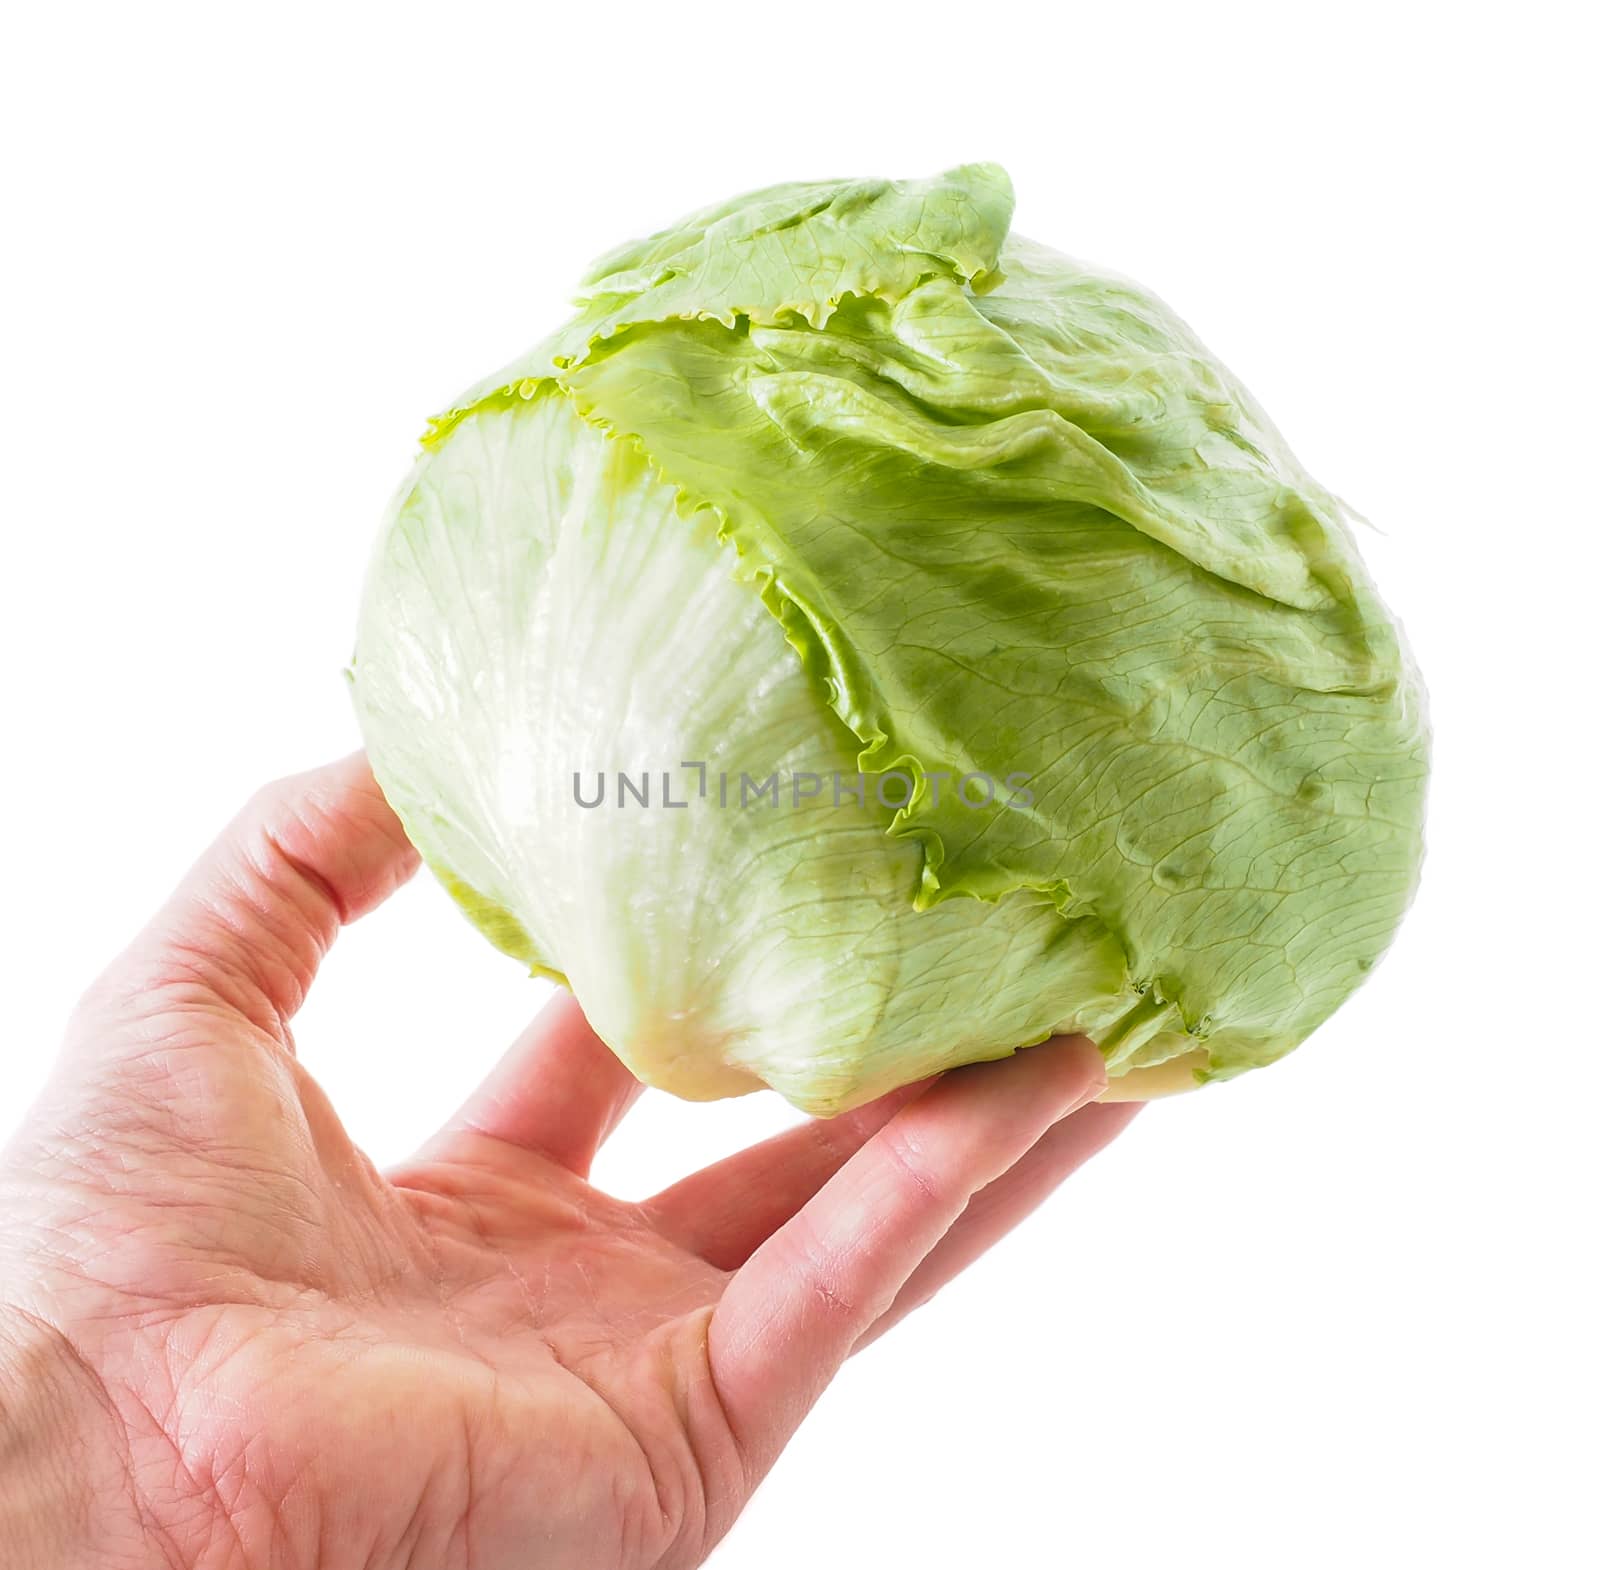 Hand holding a whole fresh green lettuce isolated towards white